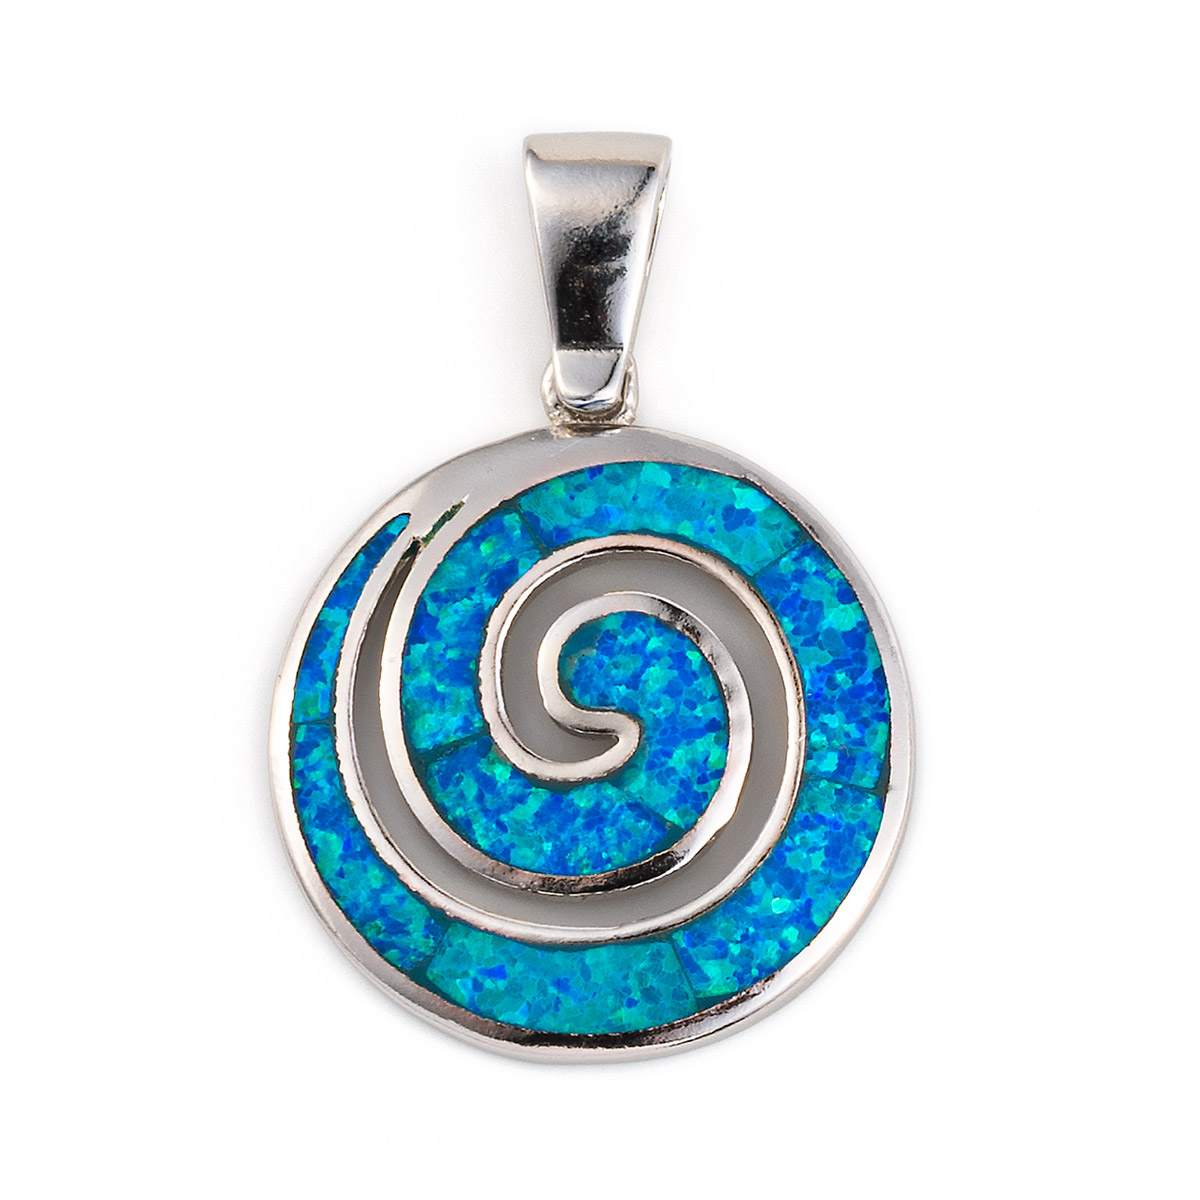 Spiral Pendant - 925 Sterling Silver with Opal